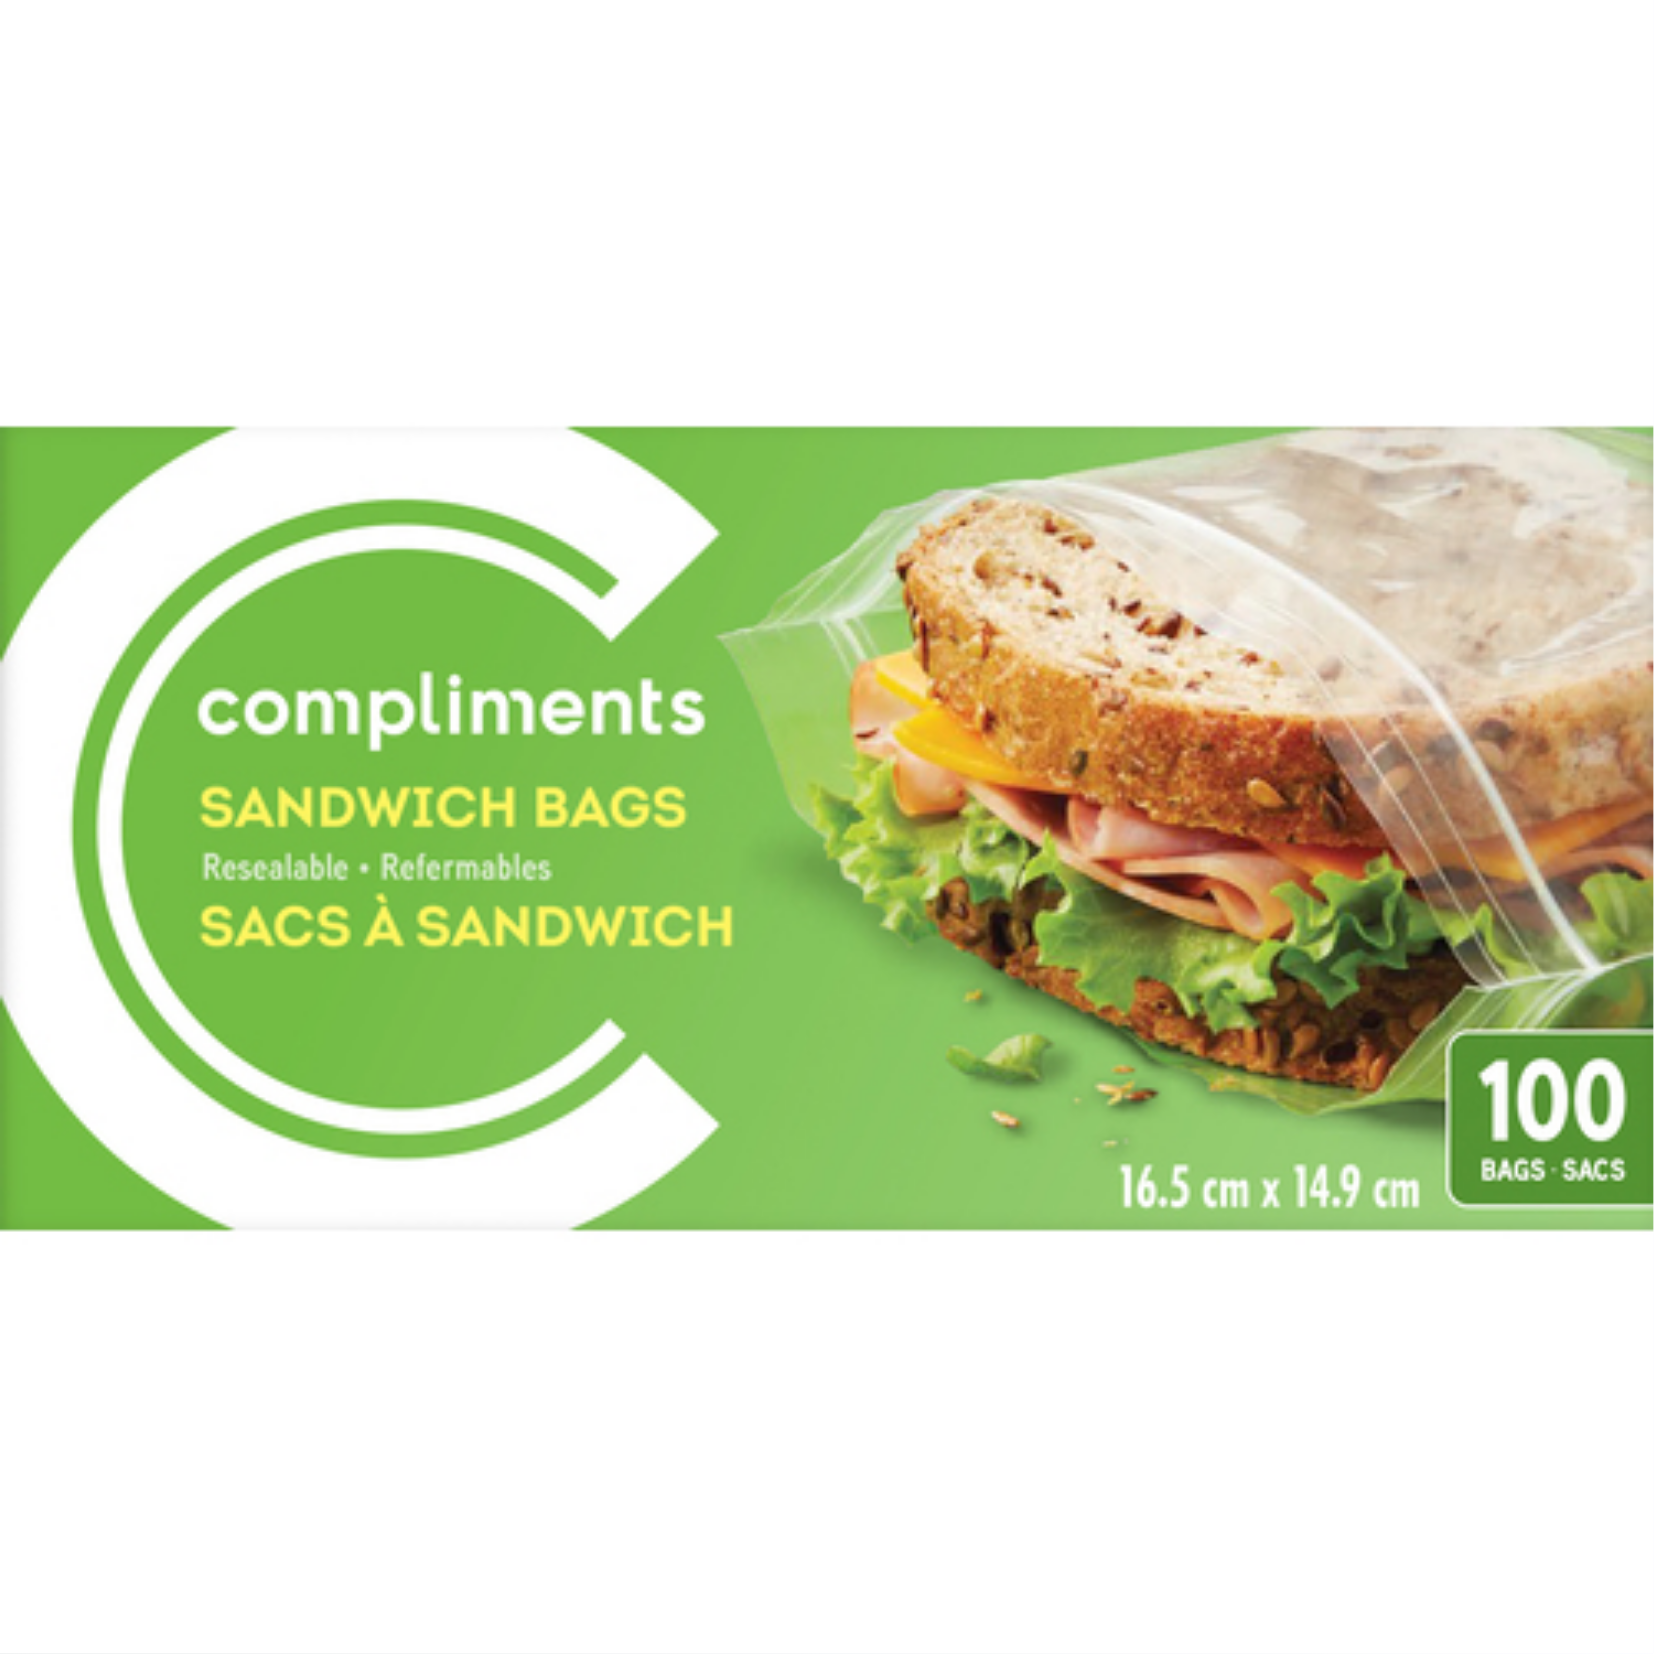 Compliments Resealable Sandwich Bags 100ct